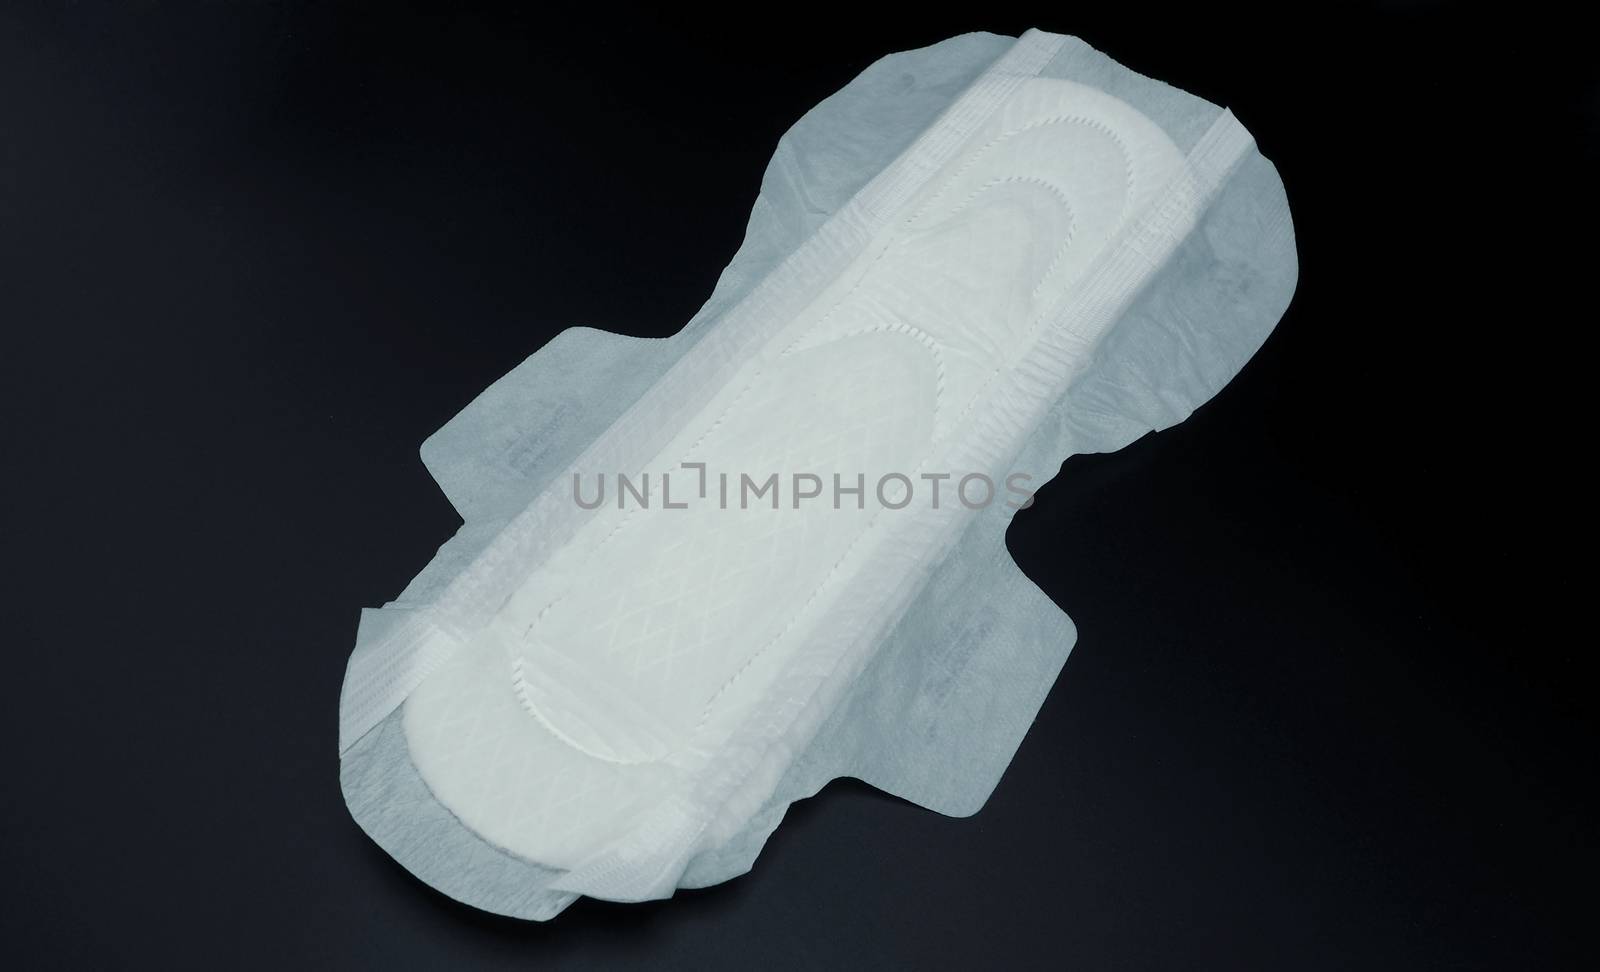 Sanitary napkin white color on black background. by gnepphoto